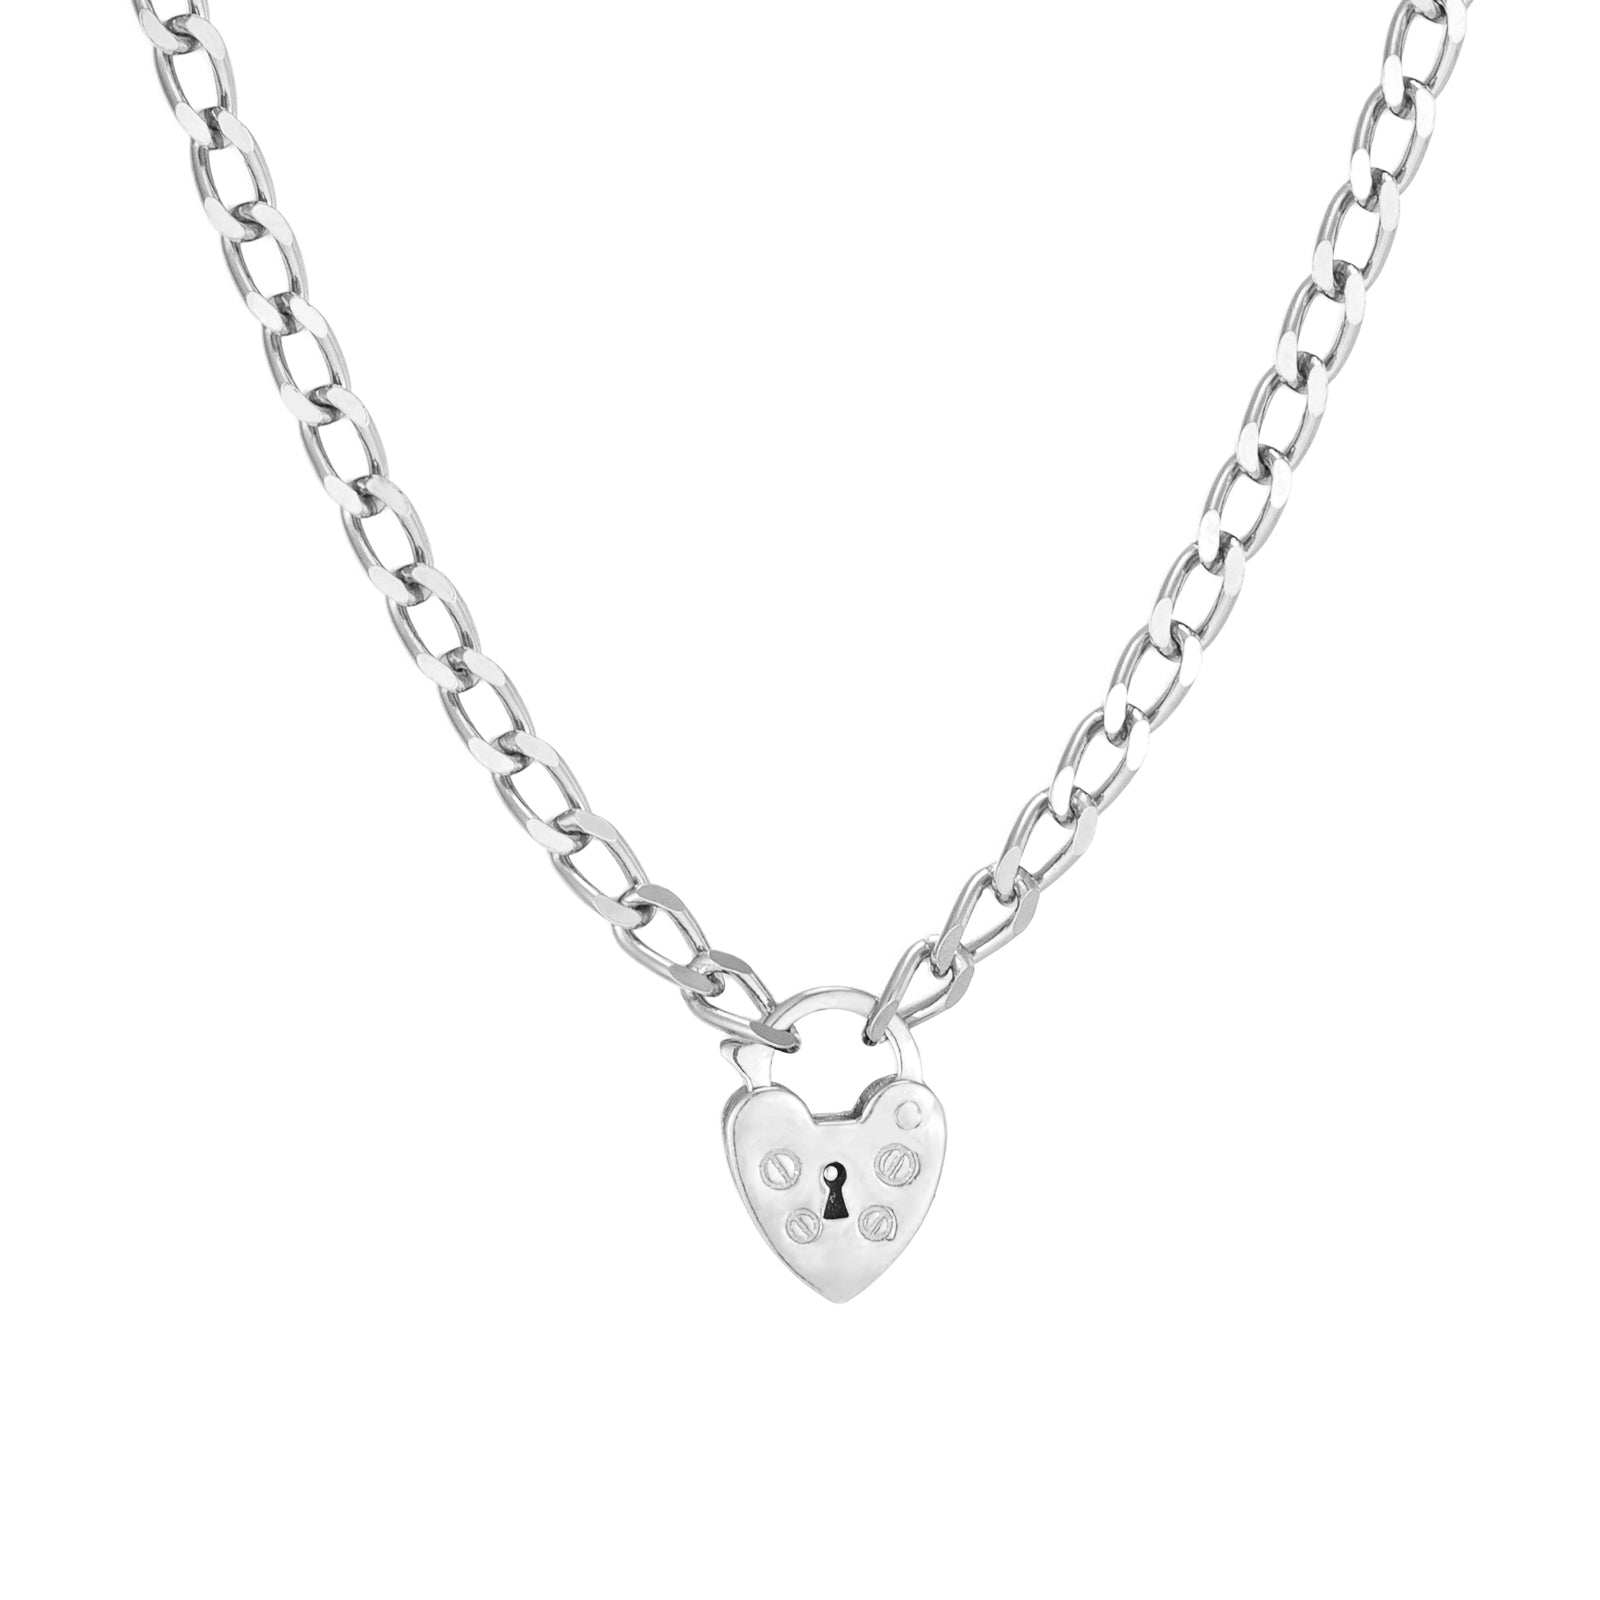 Seol Gold - Heart Lock Charm Necklace